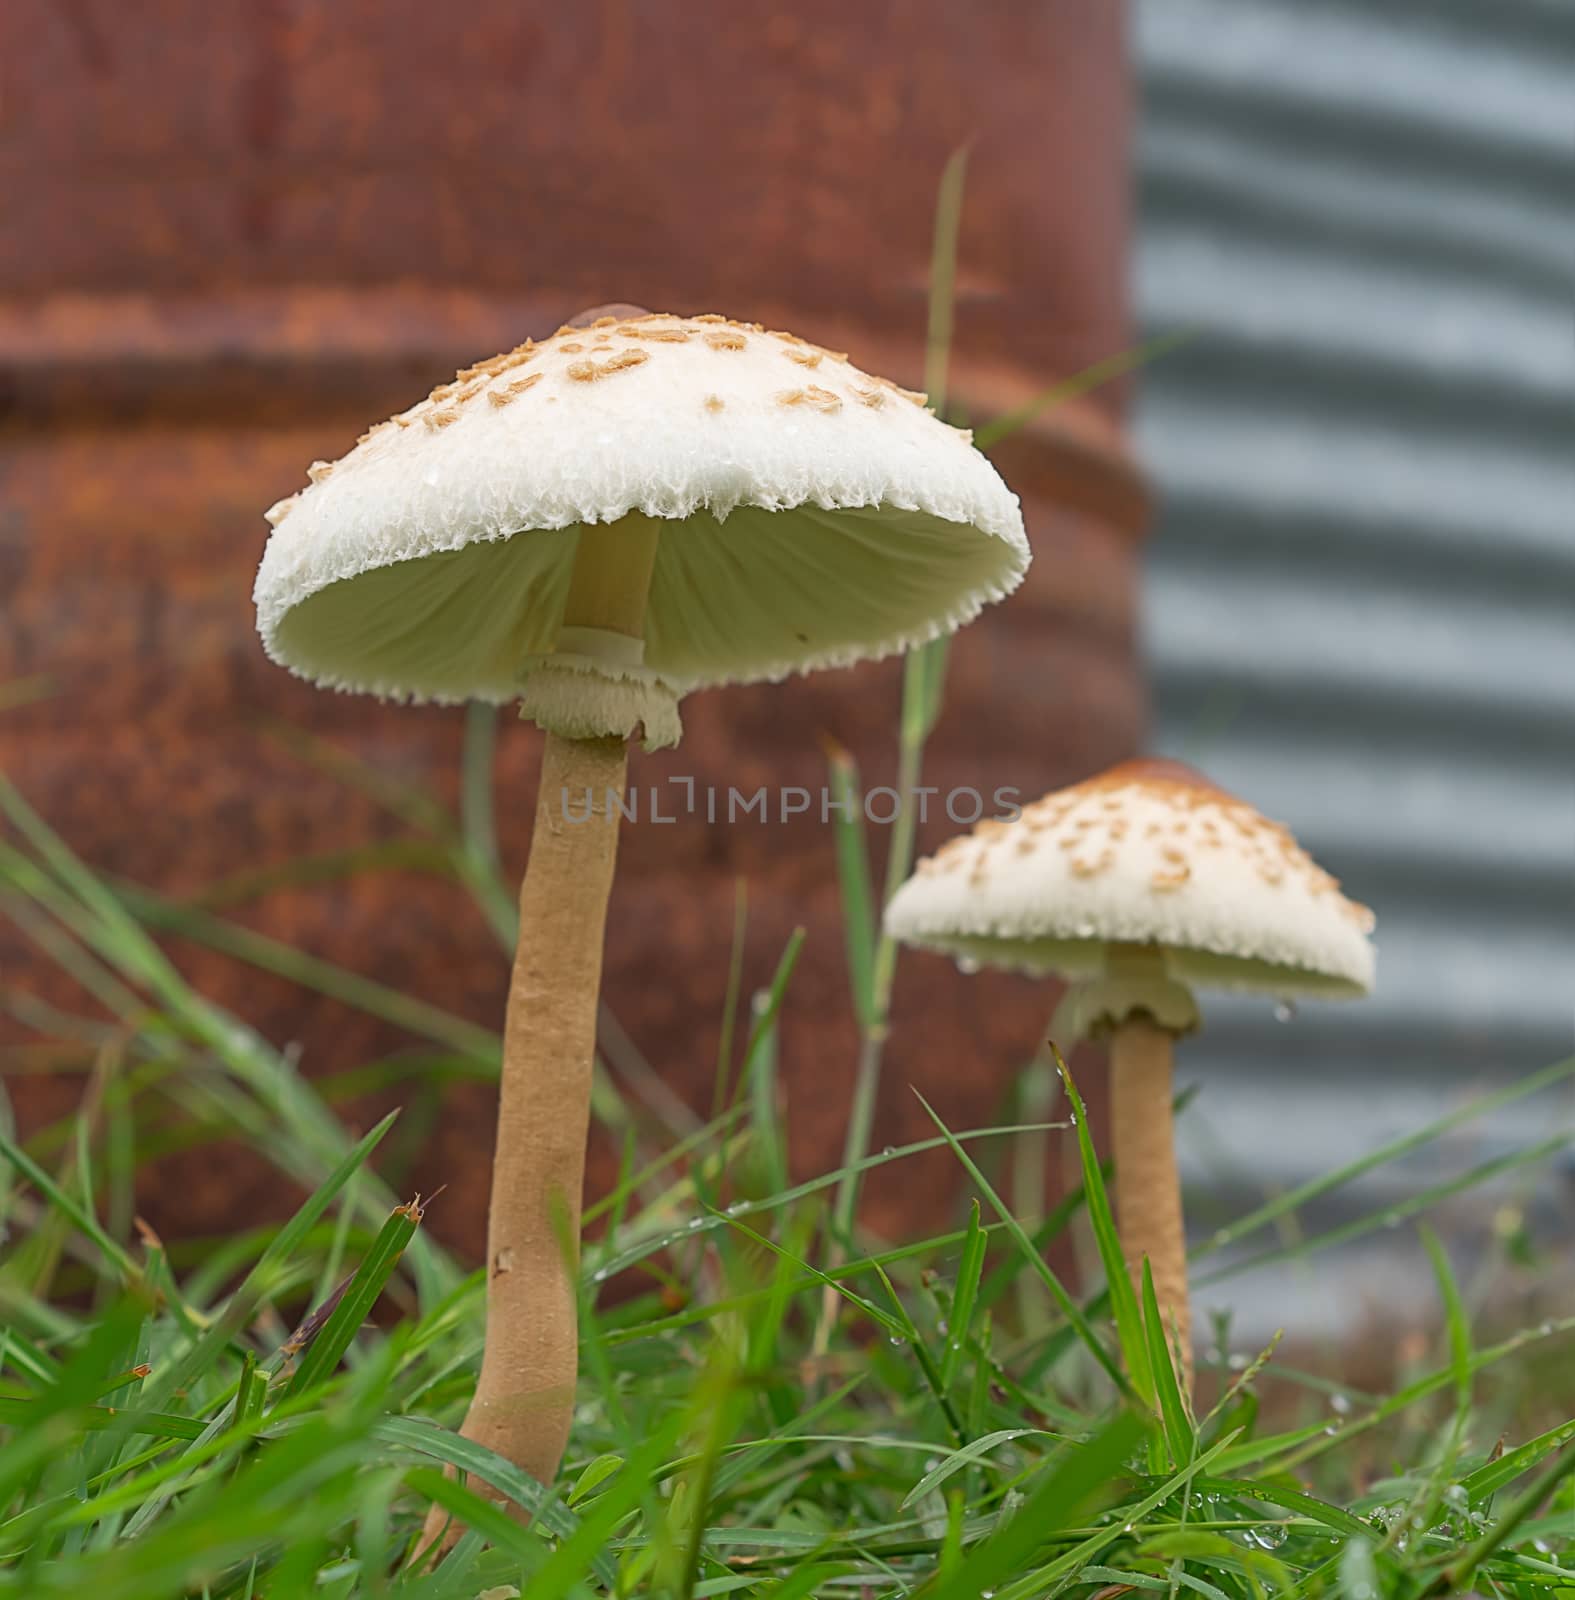 Two mushrooms growing after rain by sherj